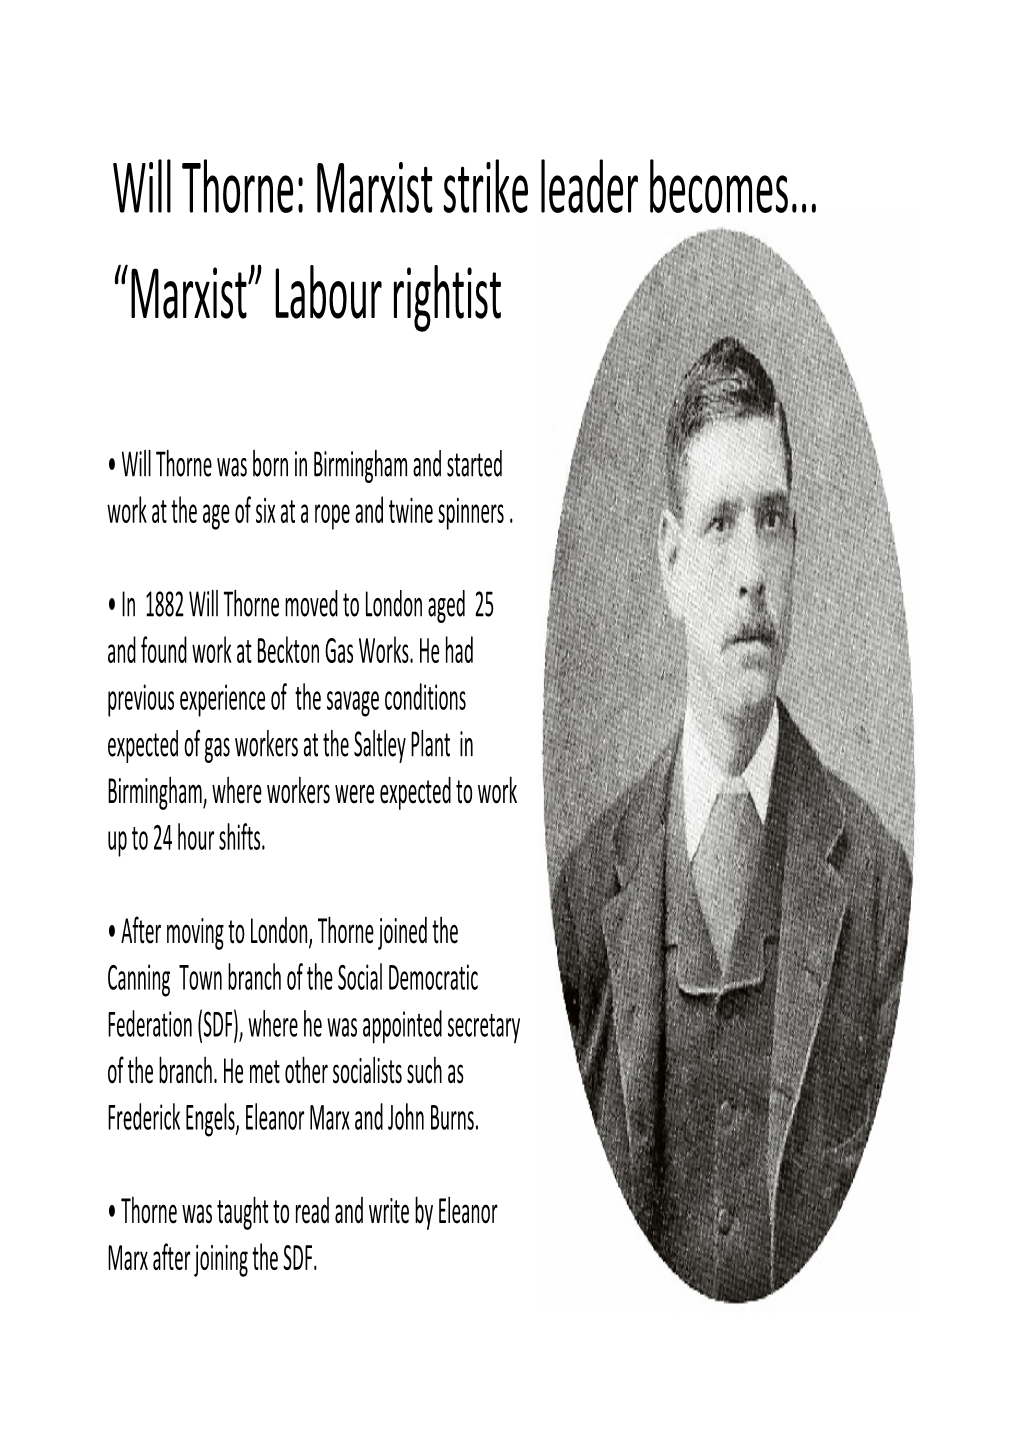 Will Thorne: Marxist Strike Leader Becomes